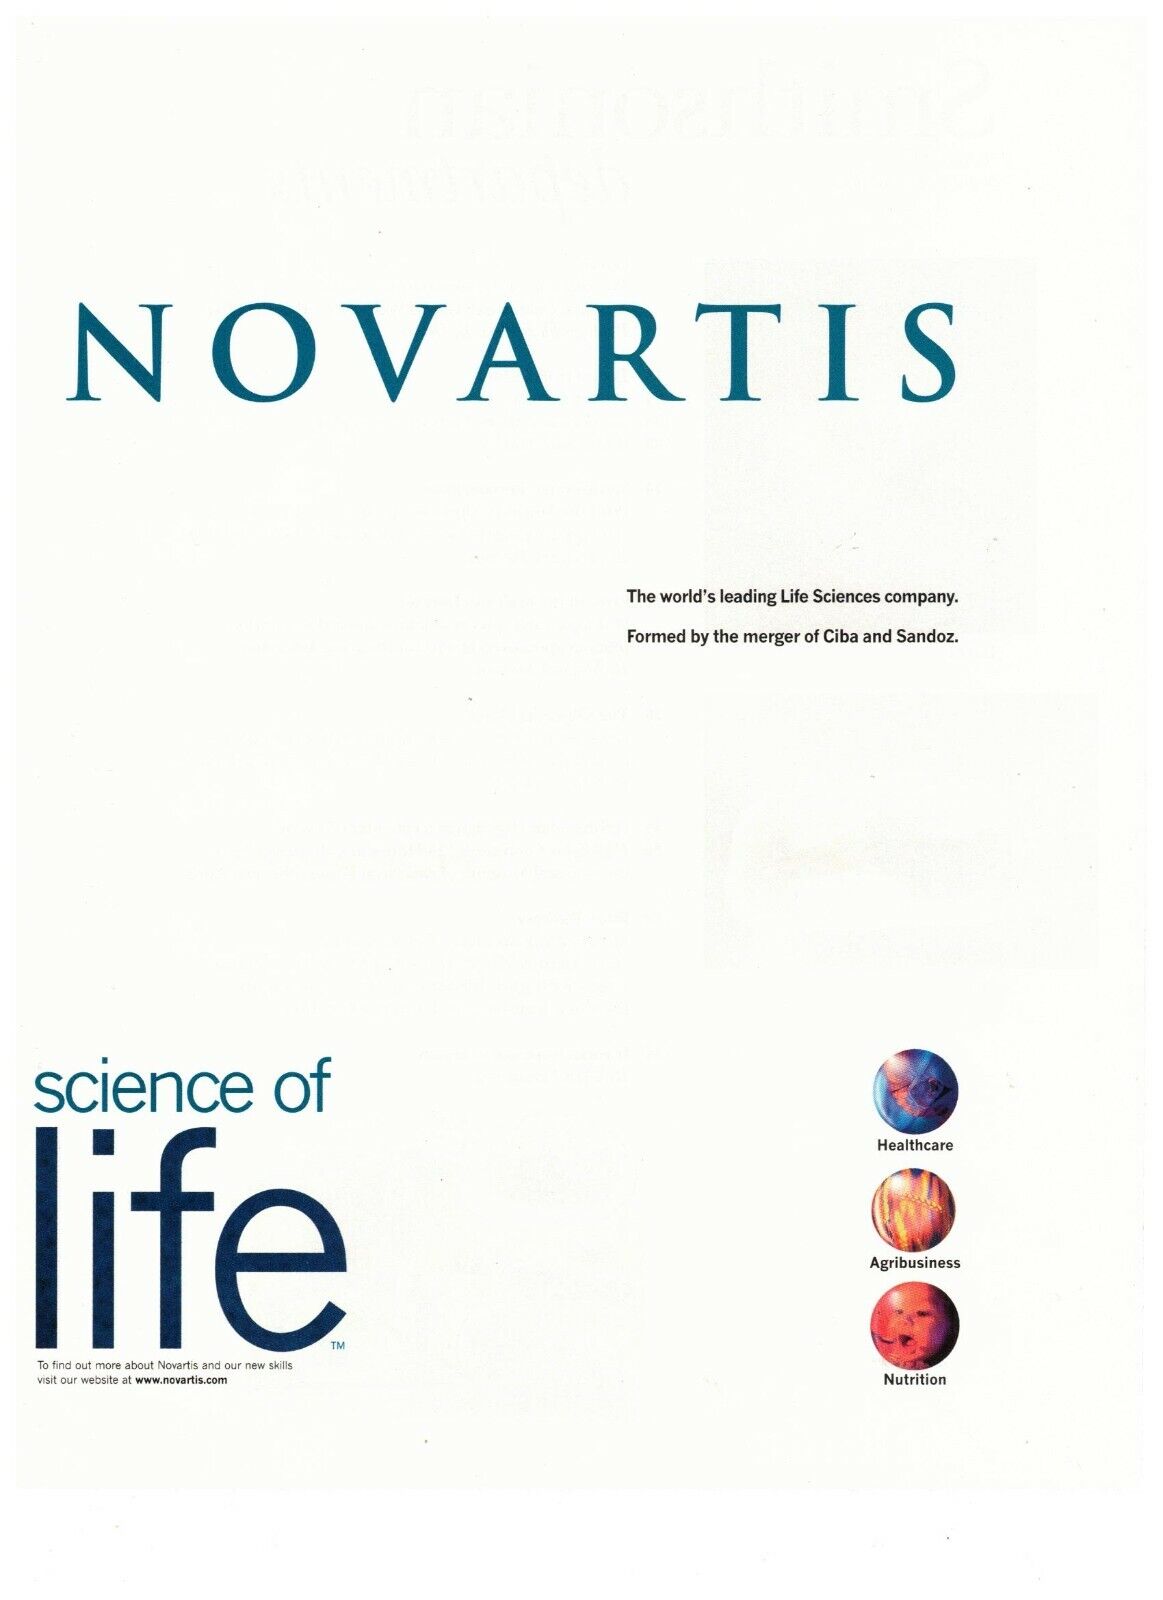 1997 Novartis New Skills Science of Life Double Page Vintage Print Advertisement